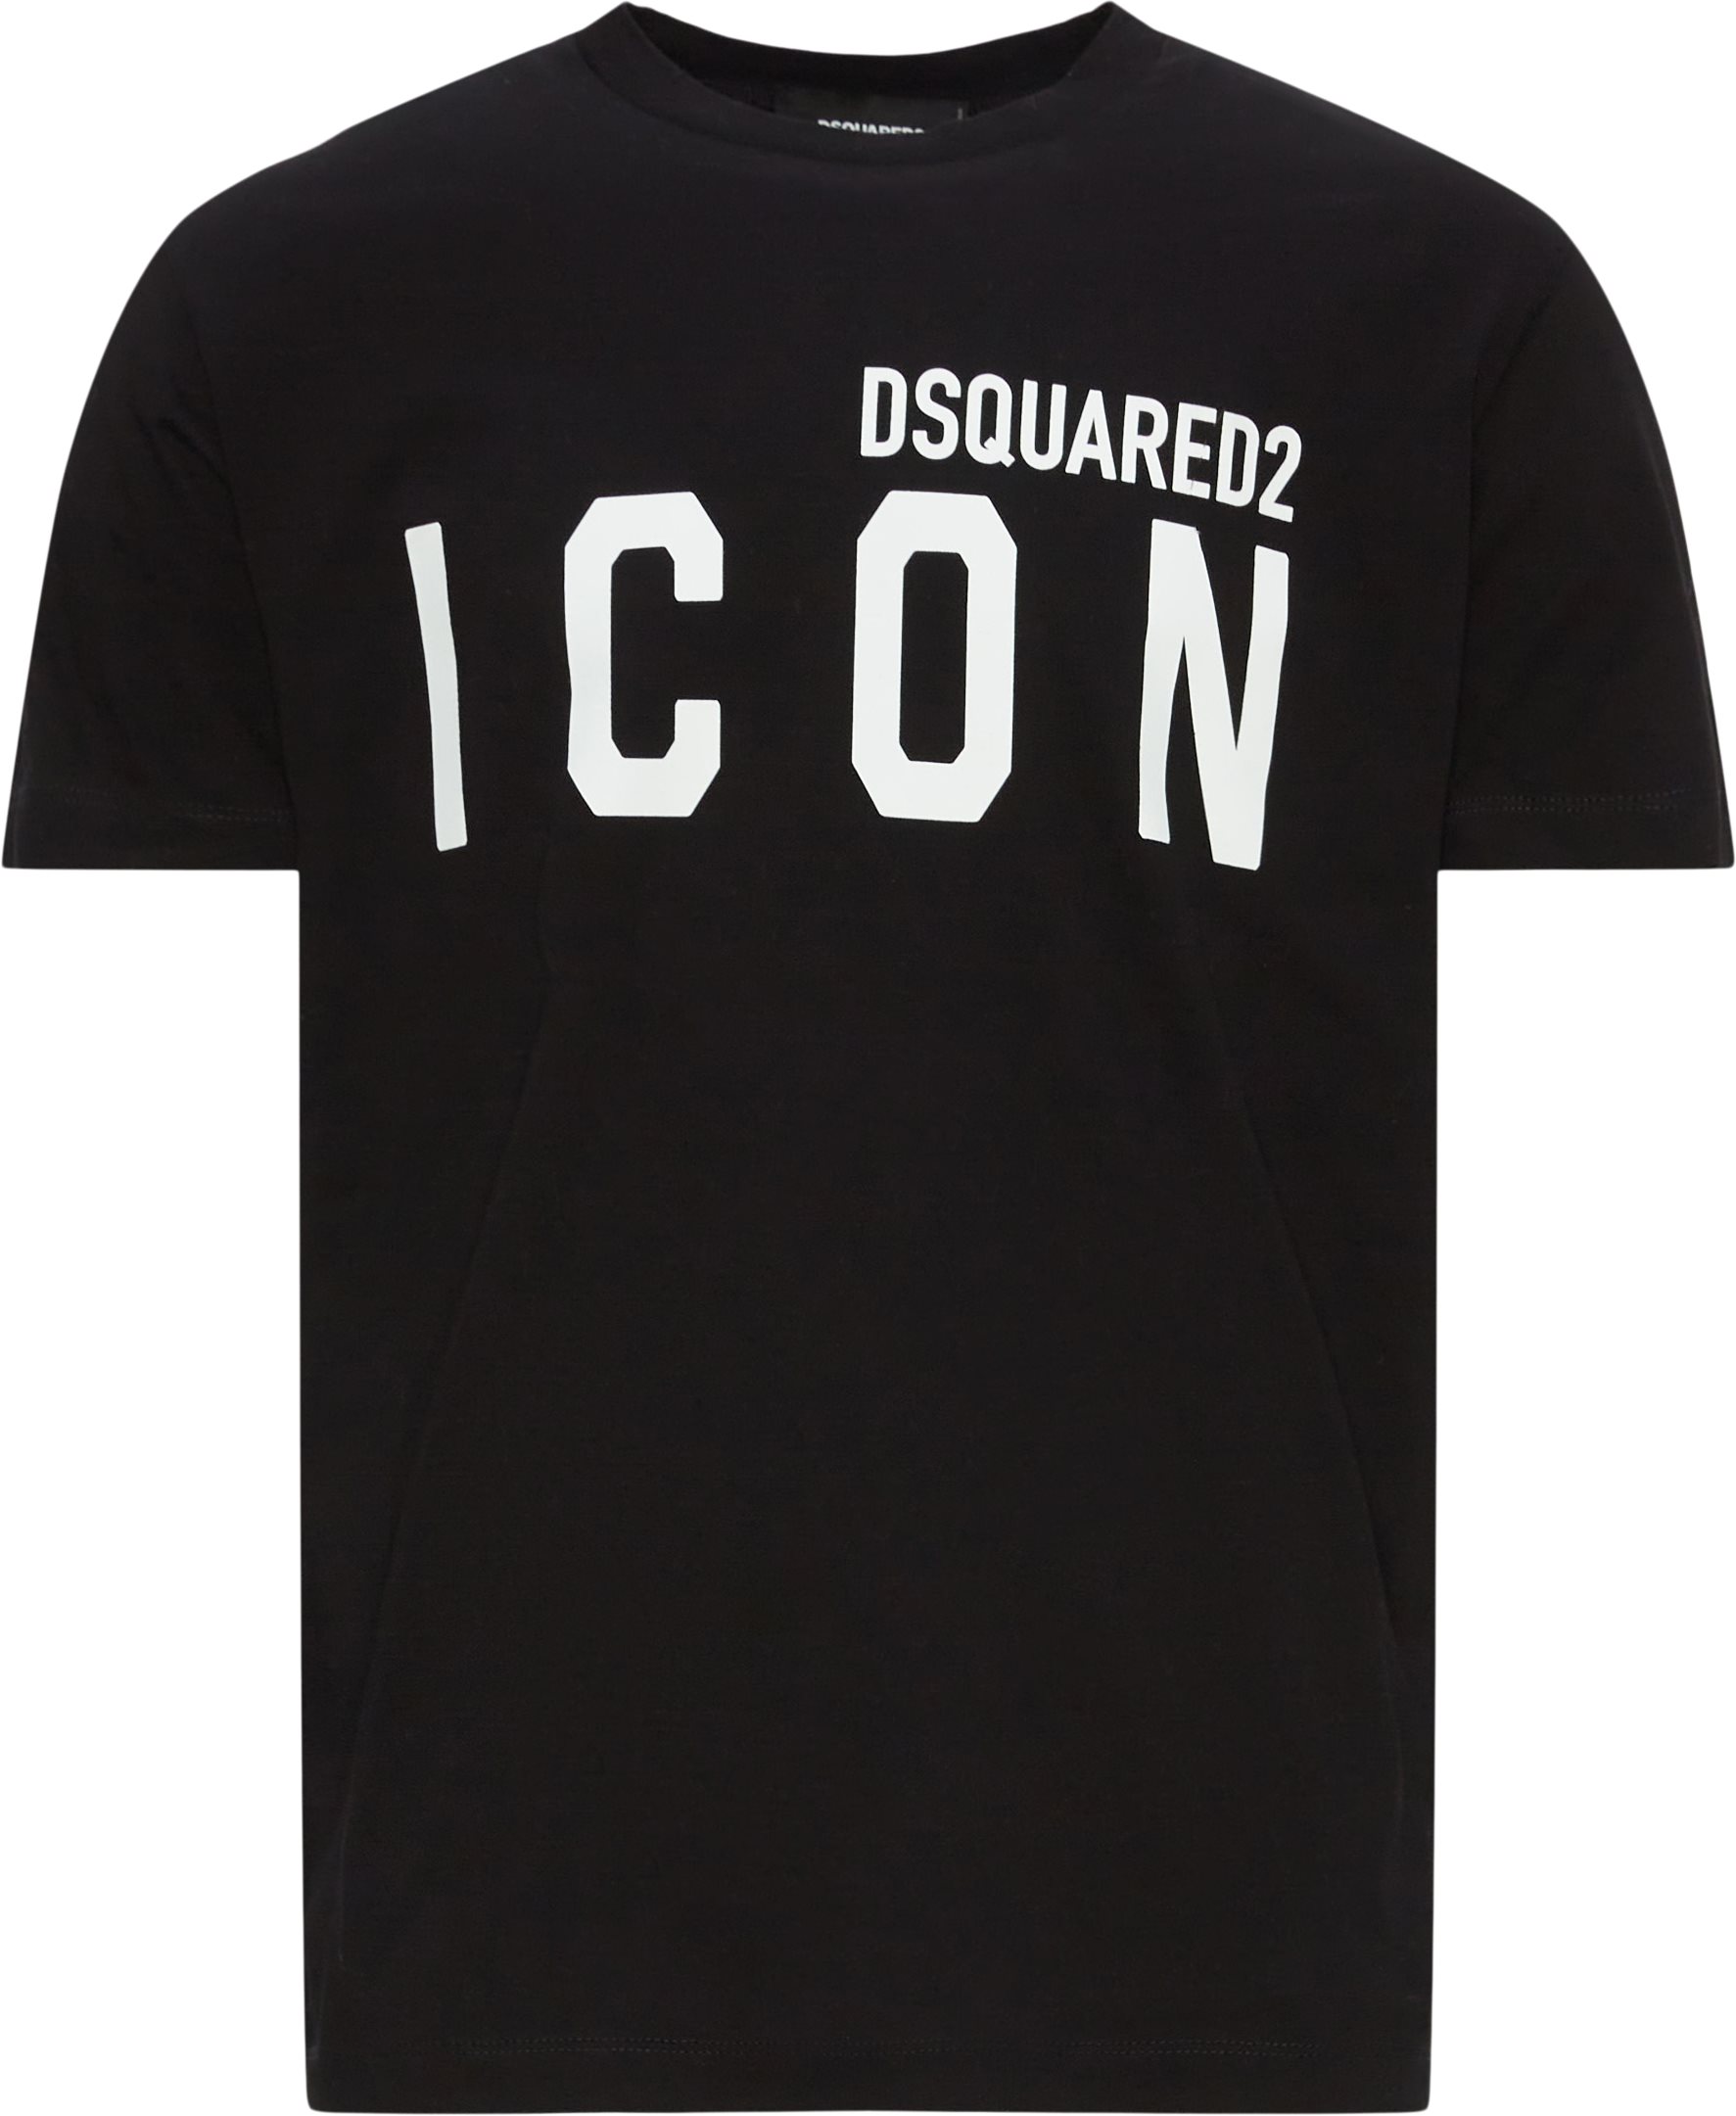 Dsquared2 T-shirts S79GC0003 S23009 ICON Sort